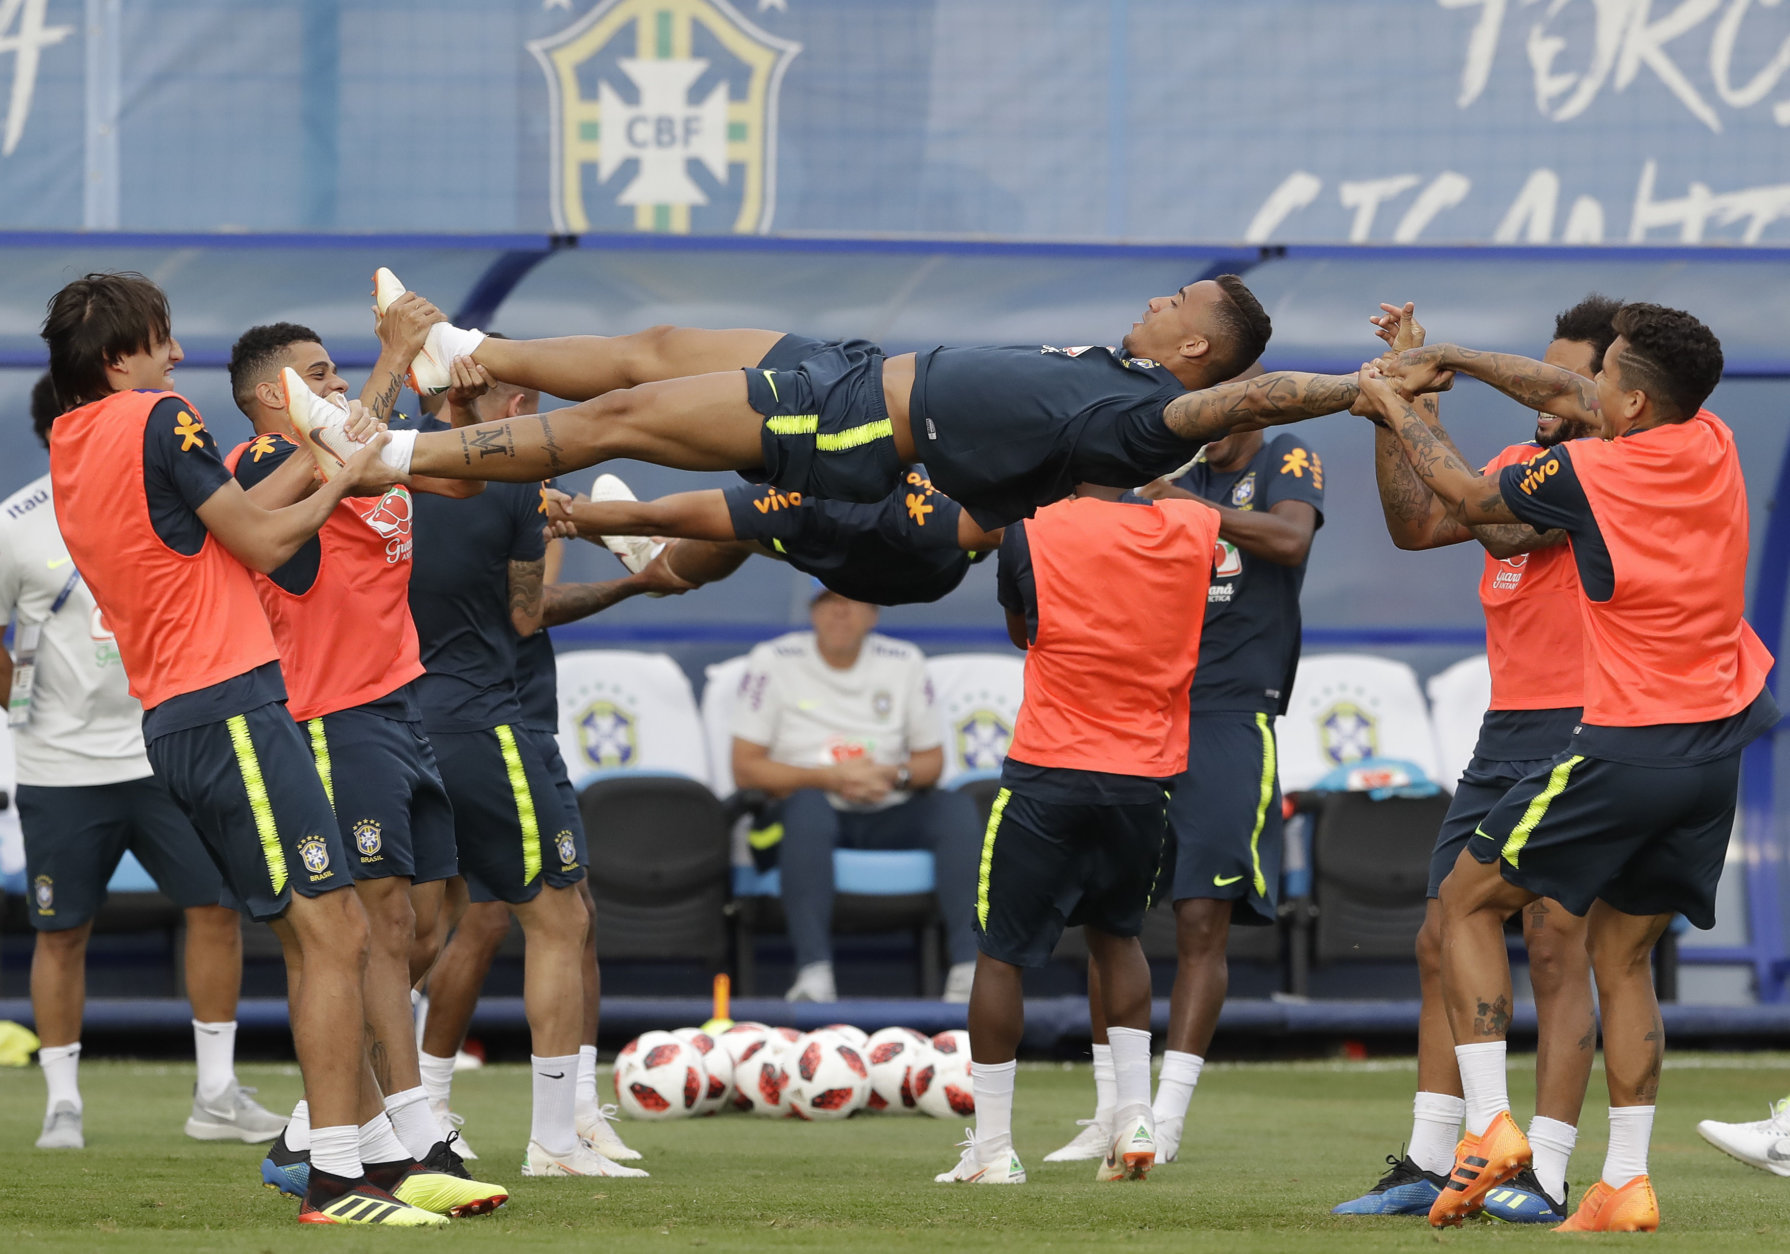 Brazil's players stretch teammate Danilo during a training session, in Sochi, Russia, Tuesday, July 3, 2018. Brazil will face Belgium on July 6 in the quarterfinals for the soccer World Cup. (AP Photo/Andre Penner)